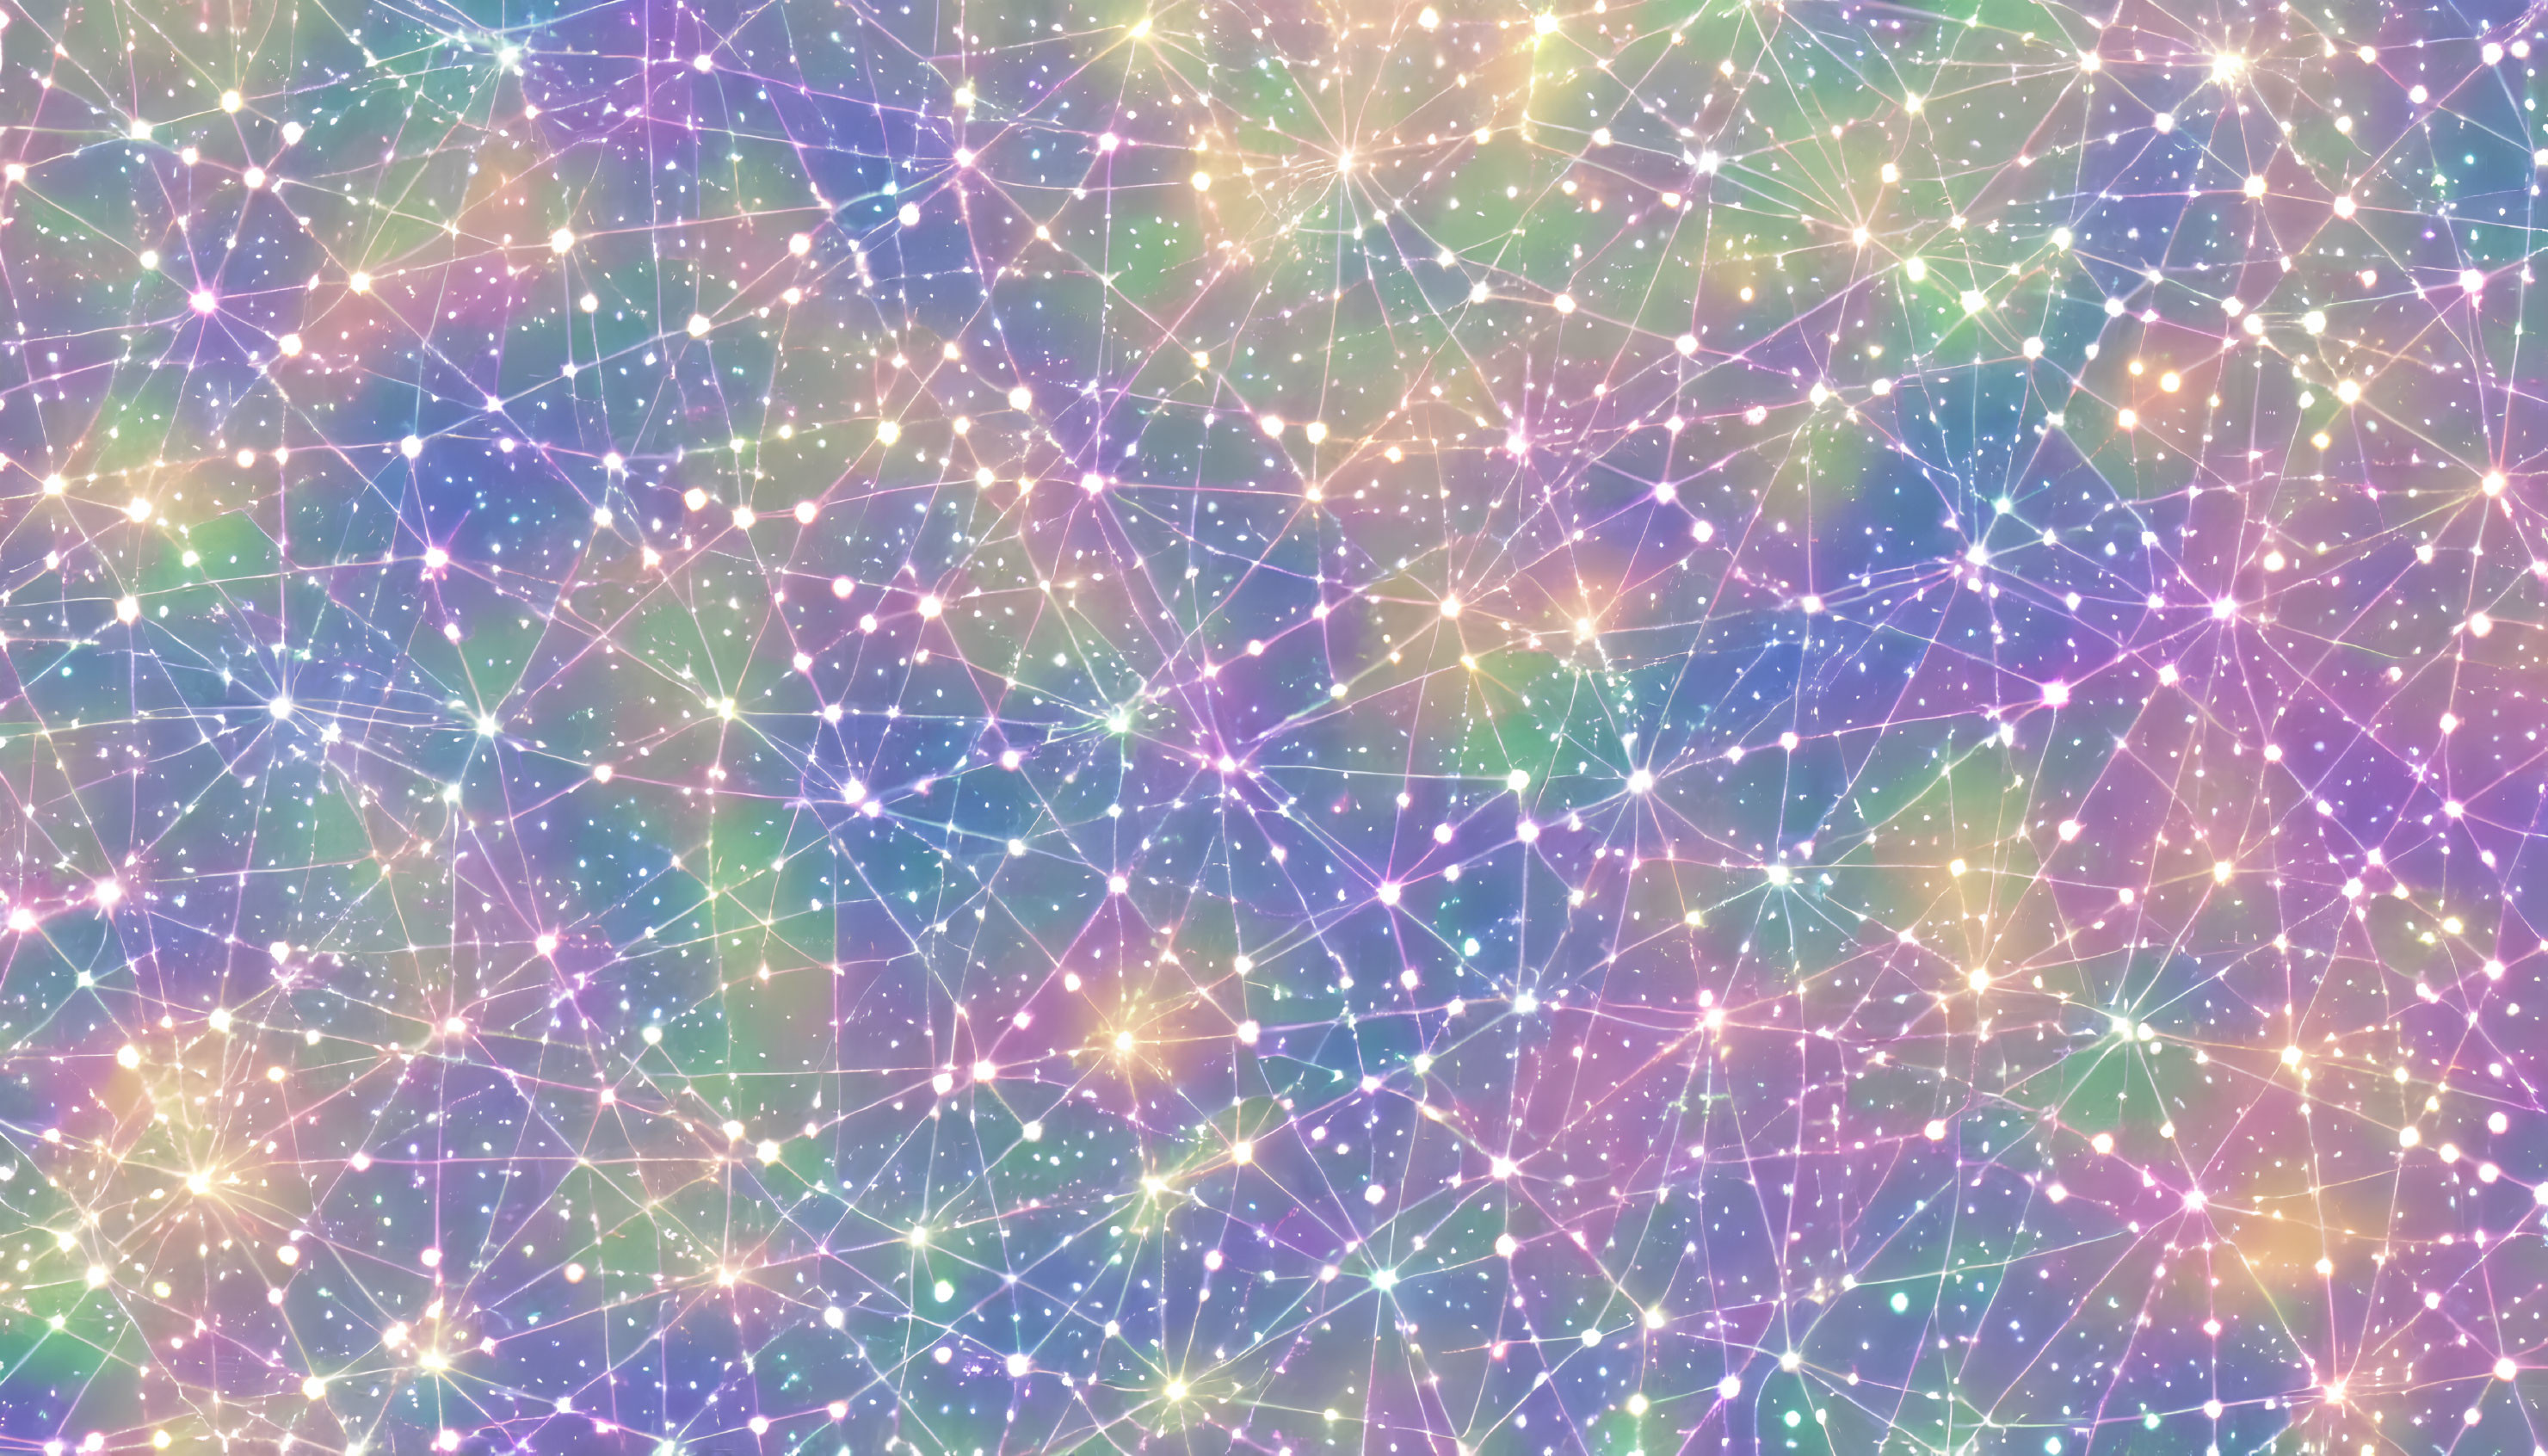 Vibrant background with interconnected lines and twinkling stars